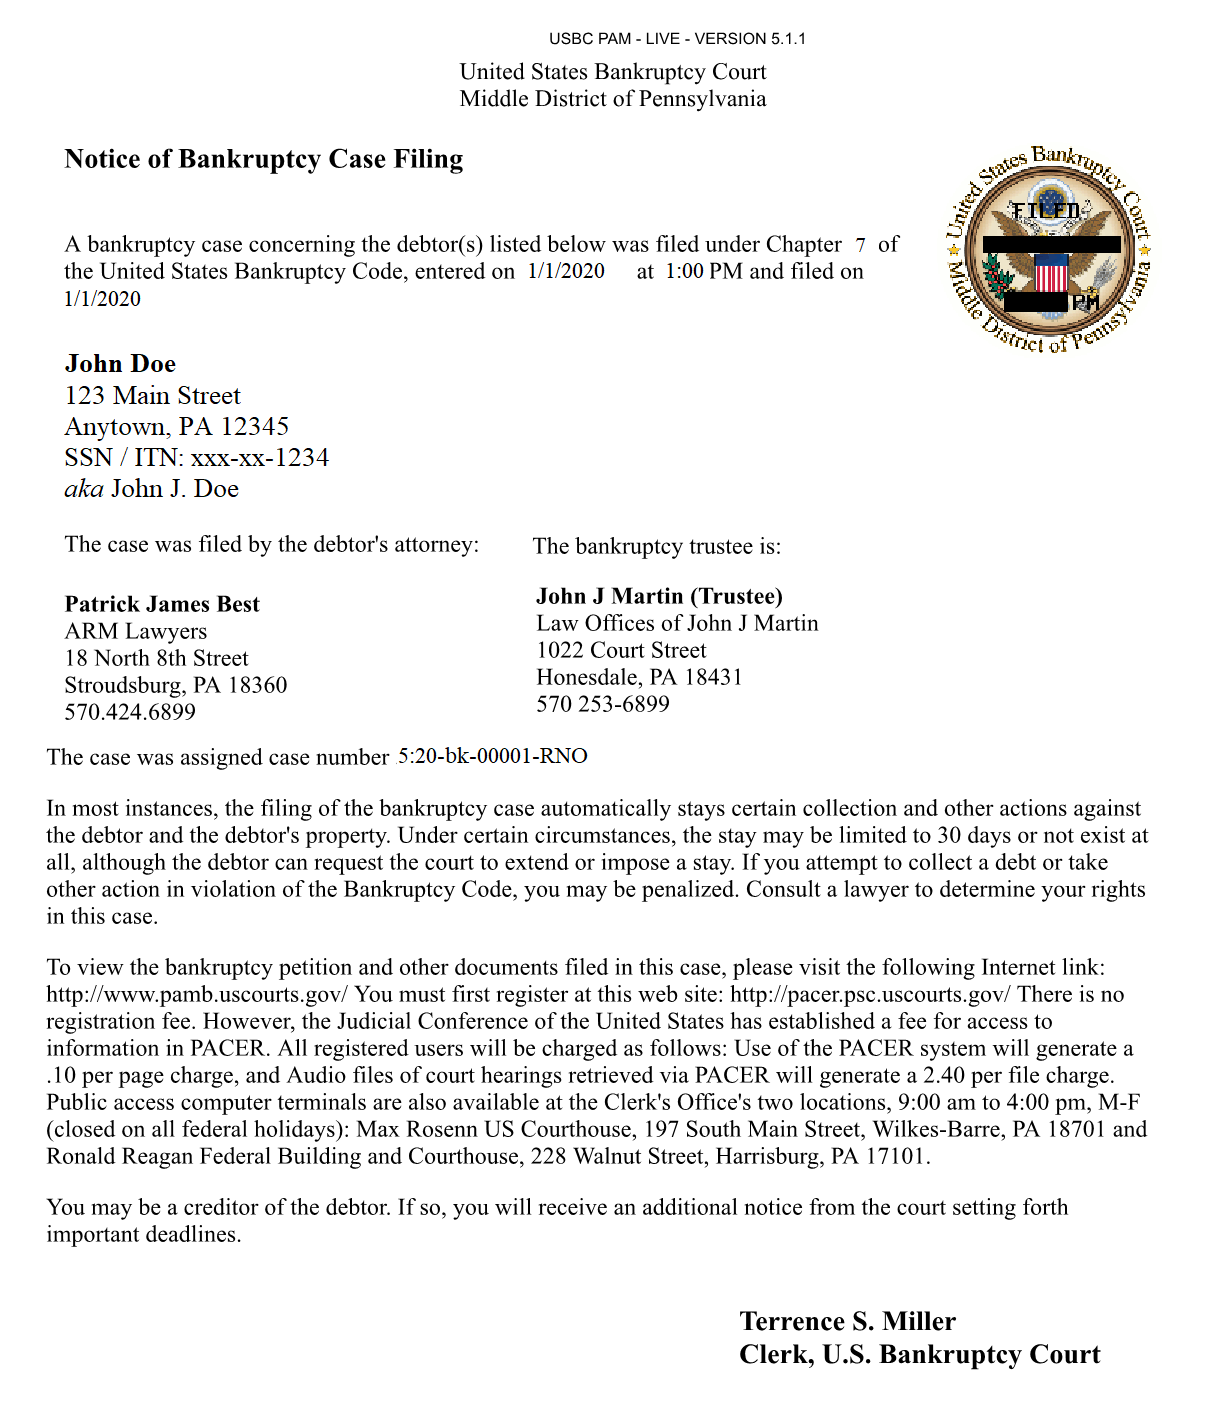 Image: Sample Notice of Bankruptcy Case Filing for a Chapter 7 case.